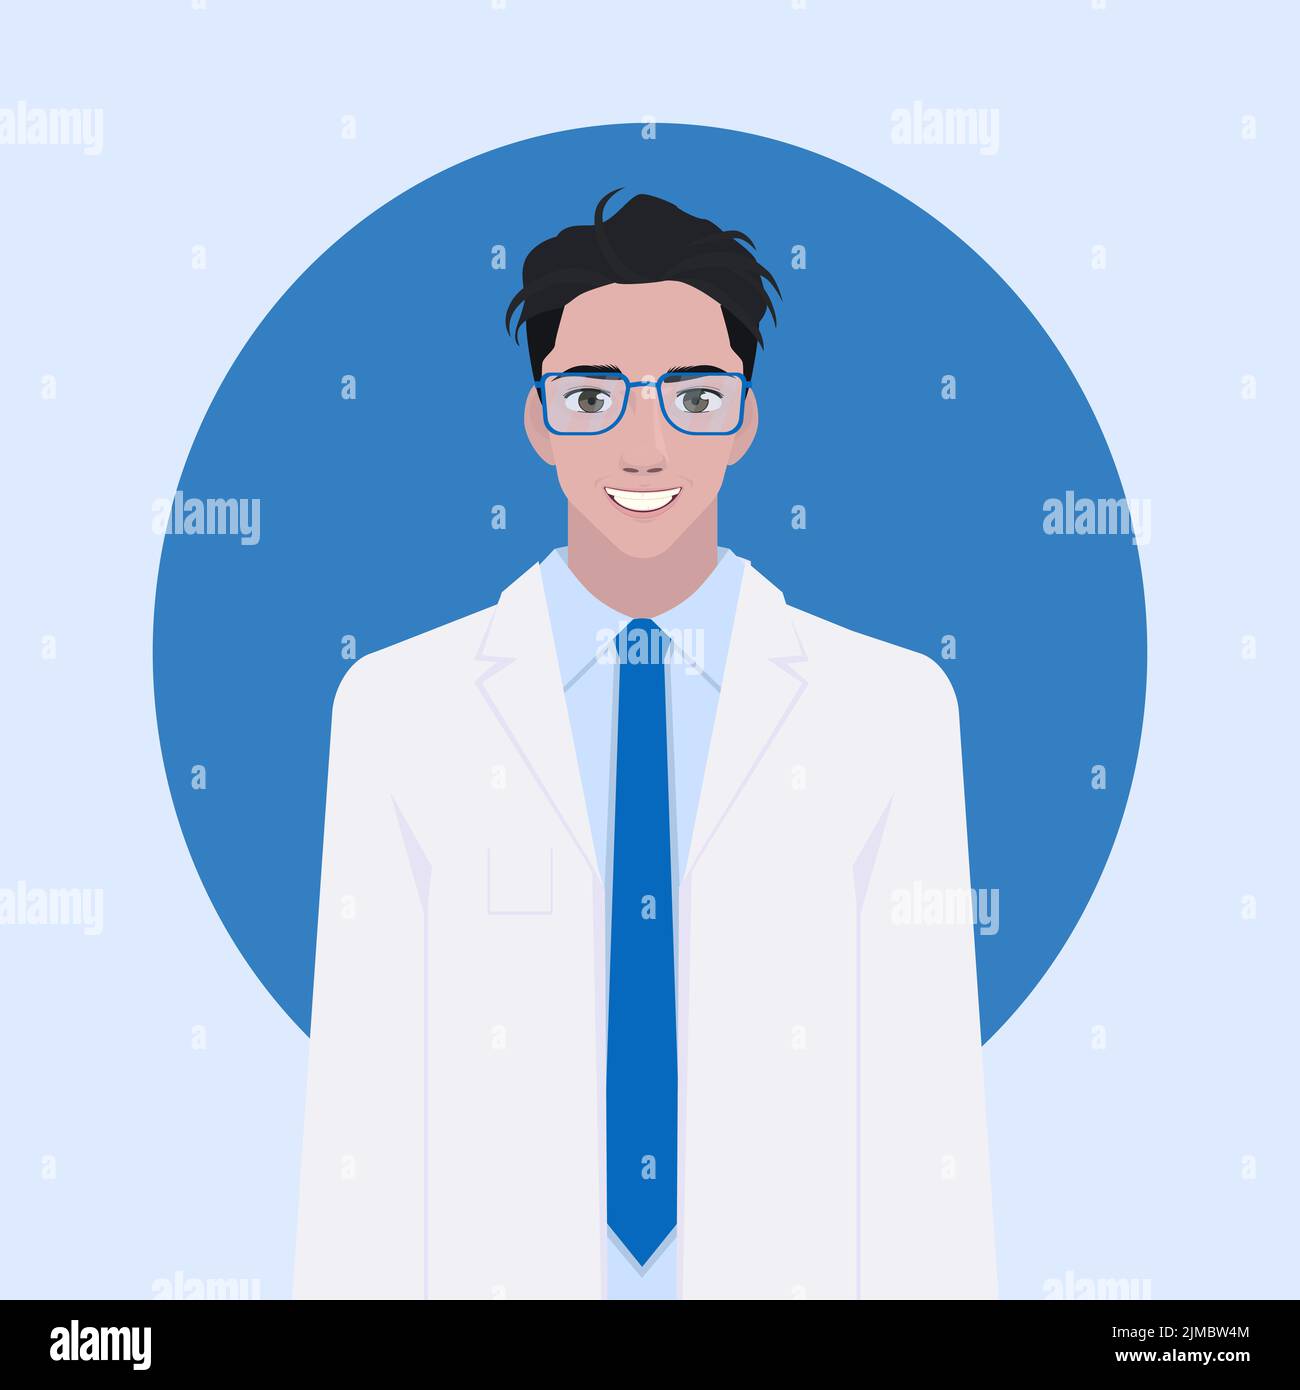 Flat half body male with glasses. Health care young doctors vector illustration person cartoon avatar profile character. Hospital staff: doctor, nurse Stock Vector